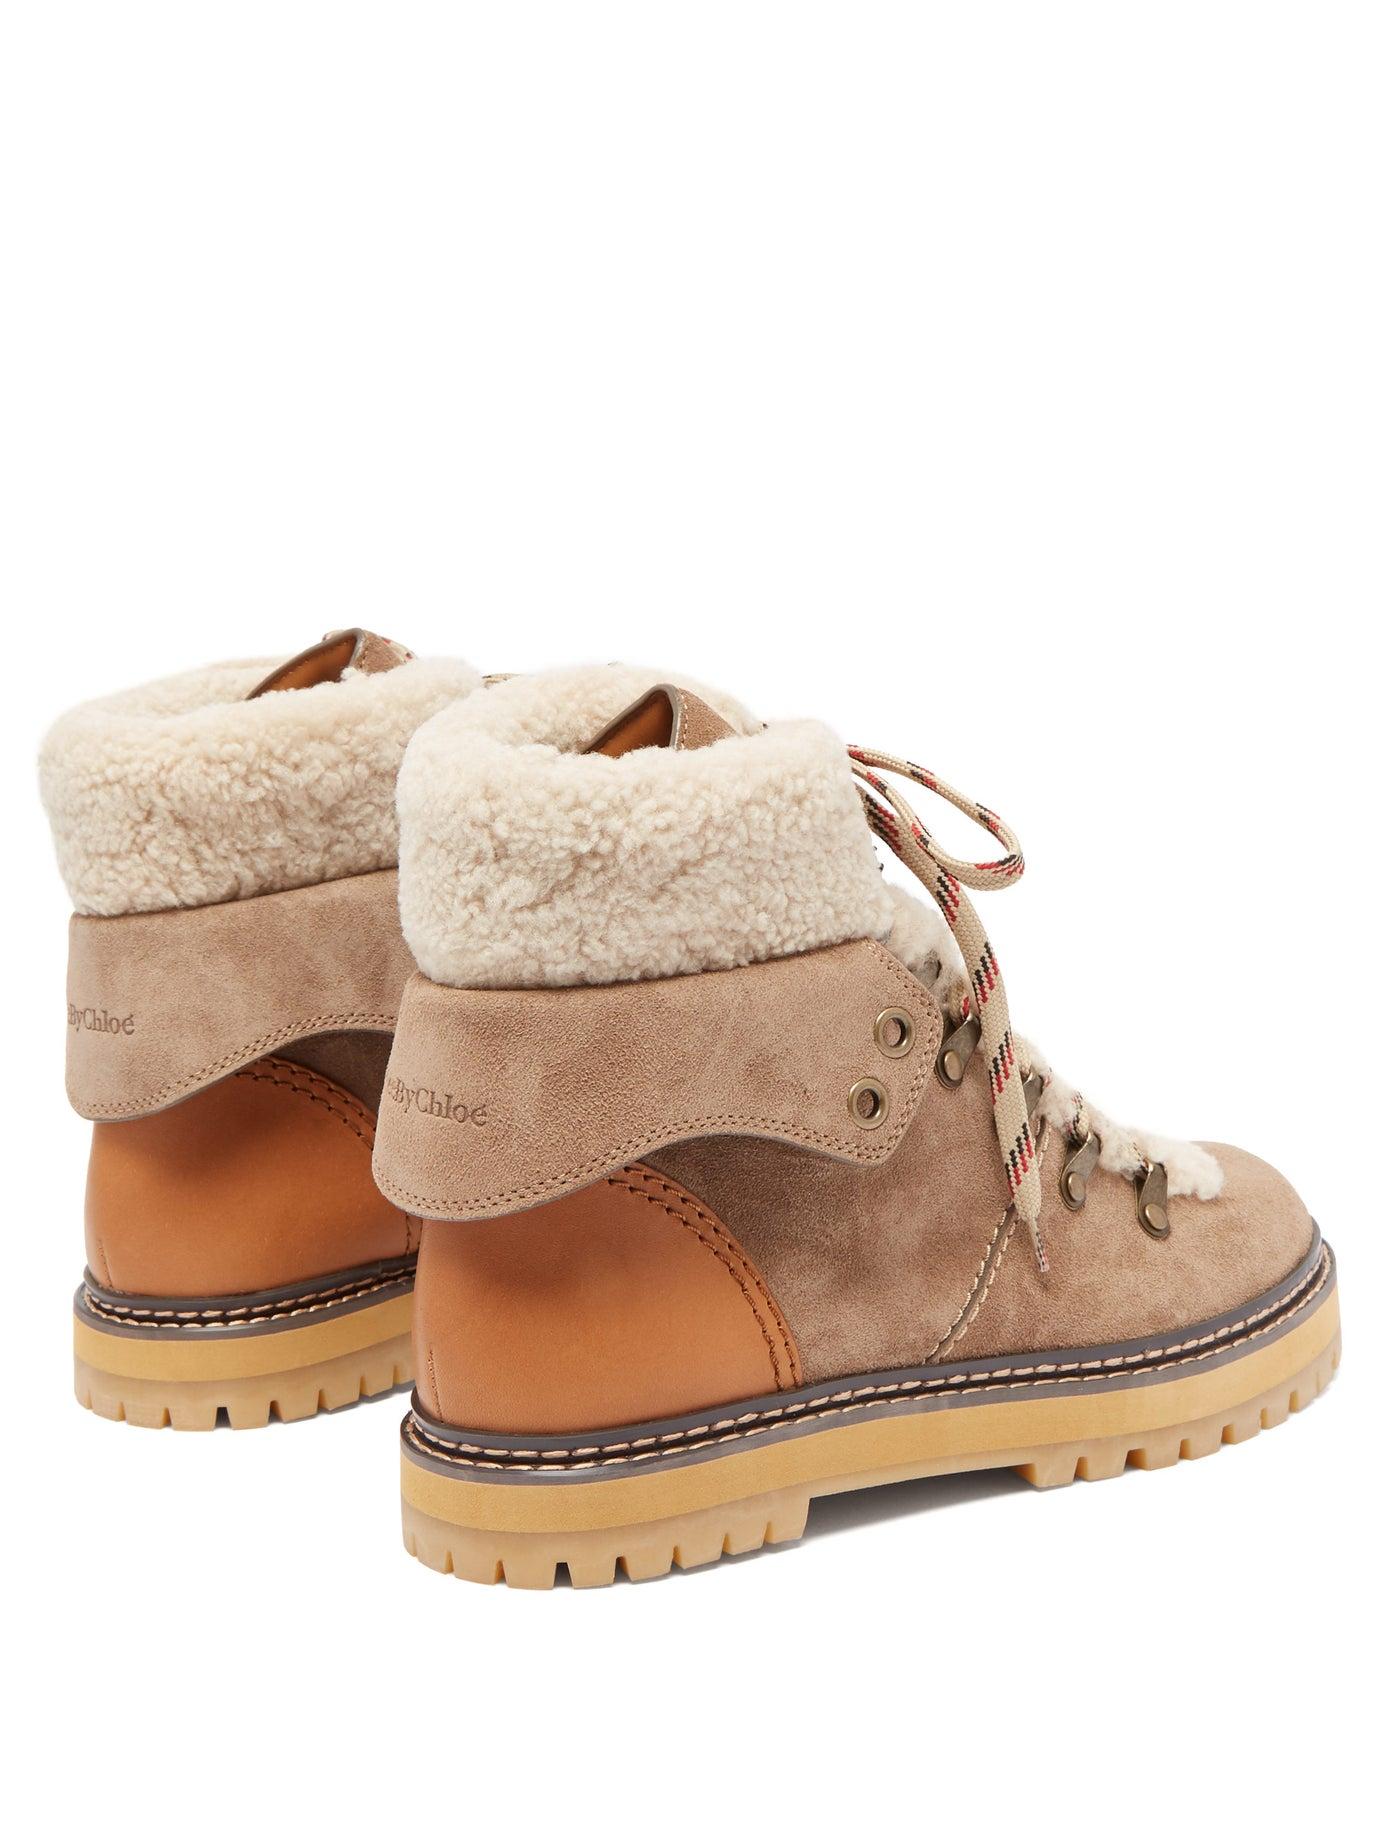 See By Chloé Shearling-lined Suede Hiking Boots in Beige White (Natural ...